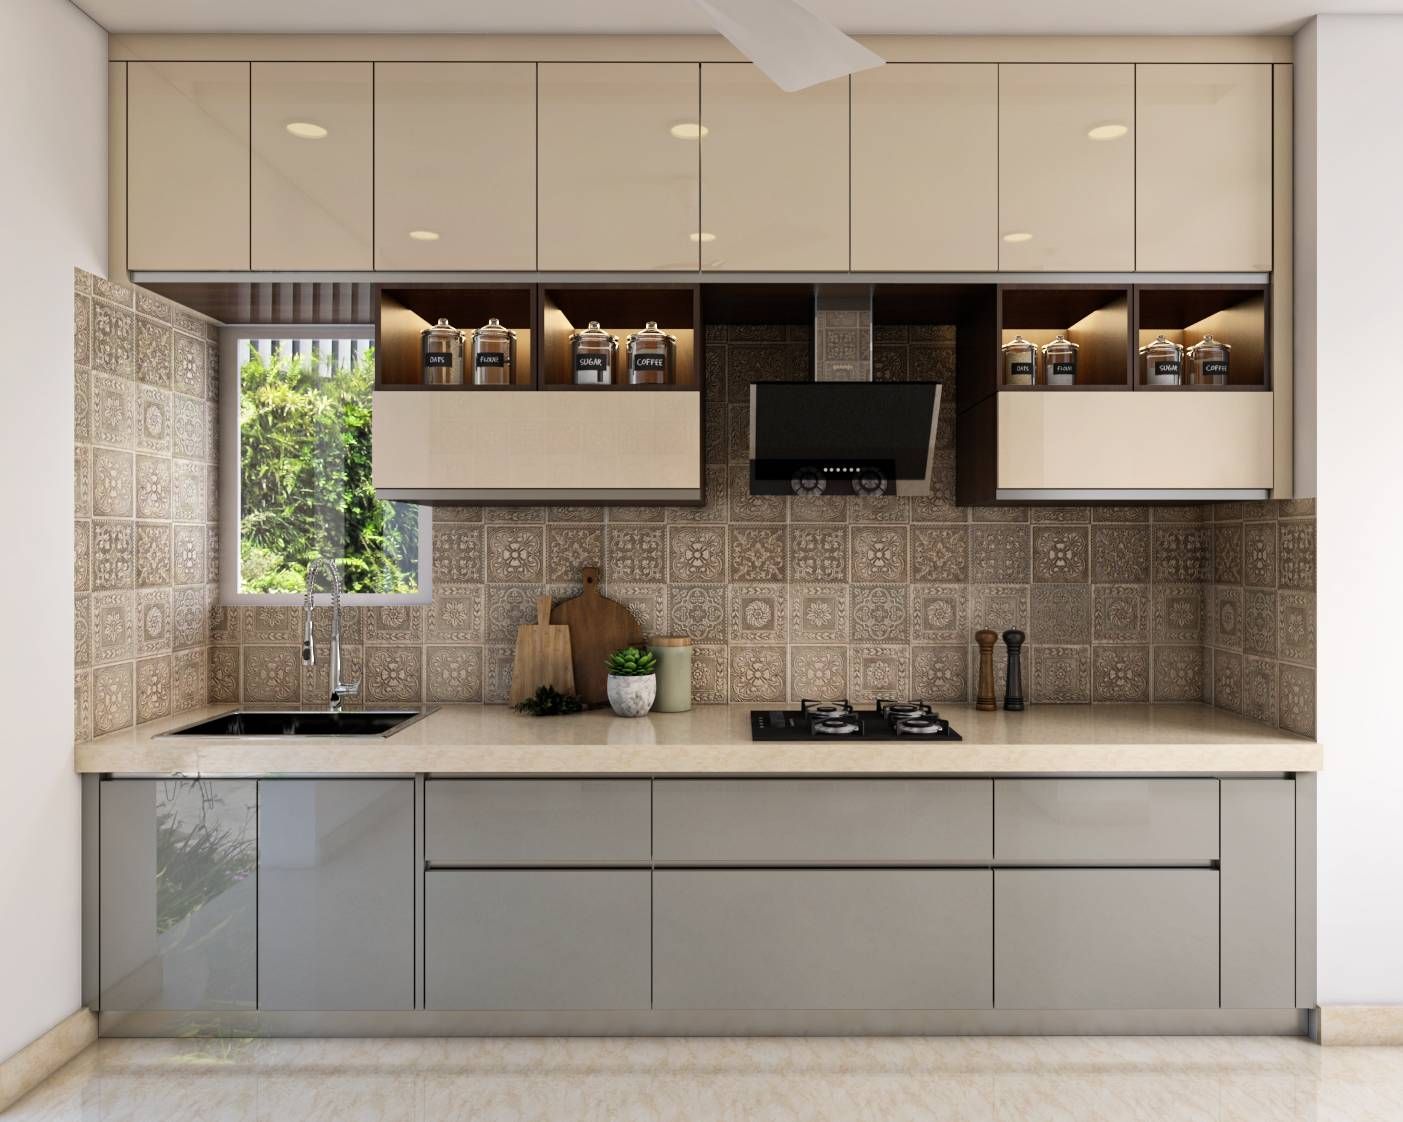 Contemporary Modular Kitchen Cabinet Design With Earthy Color Palette